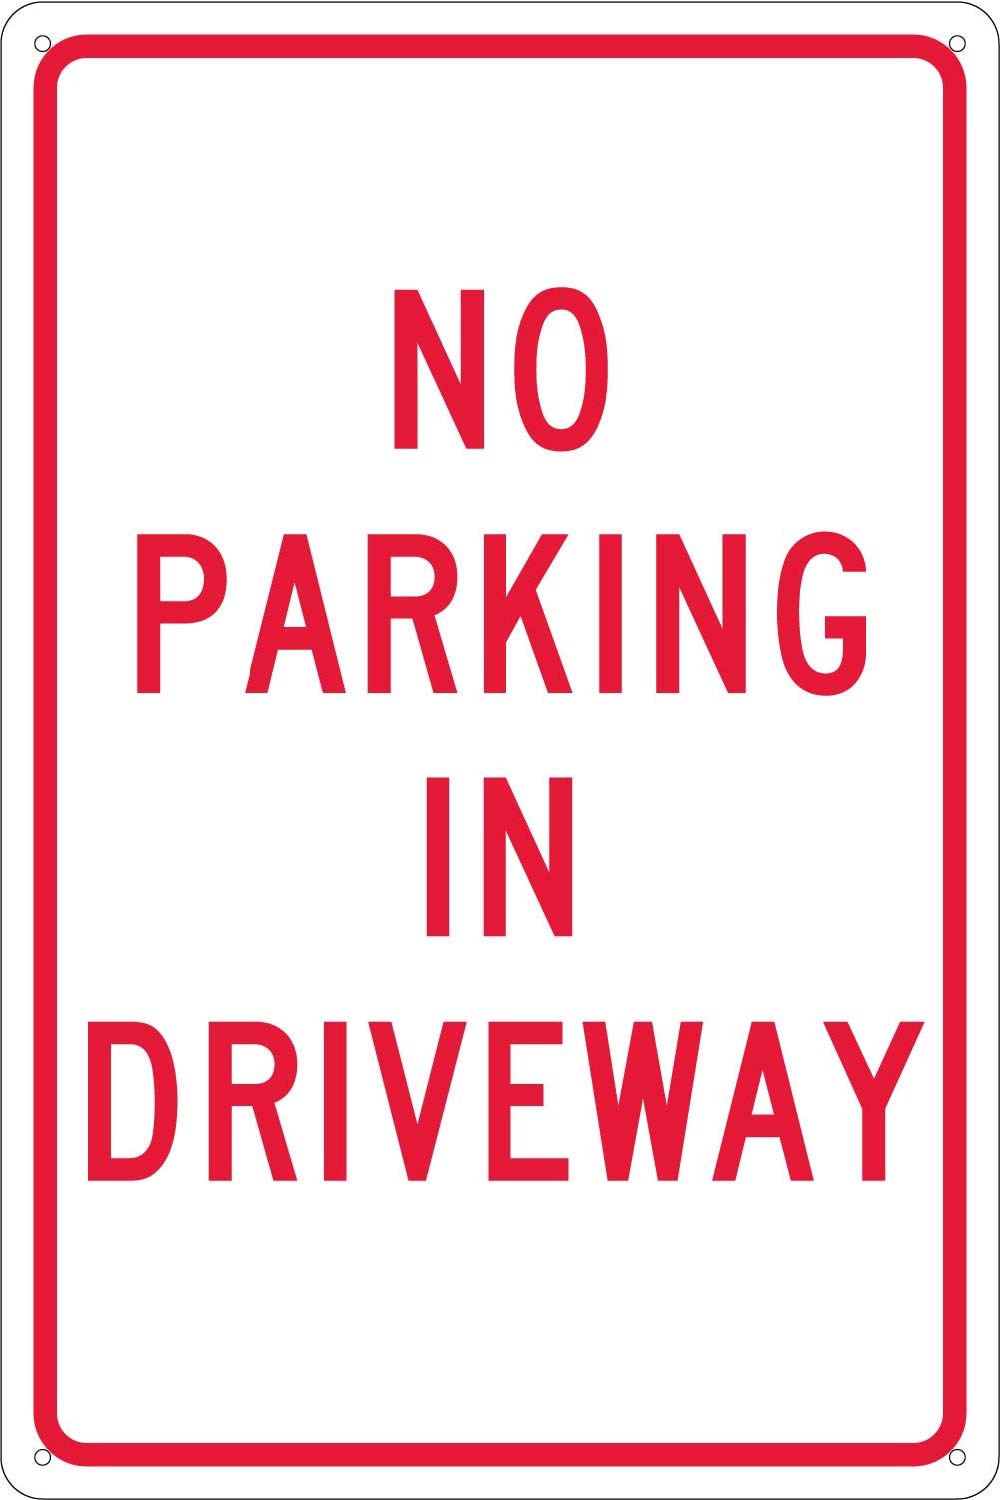 No Parking In Driveway Sign-eSafety Supplies, Inc